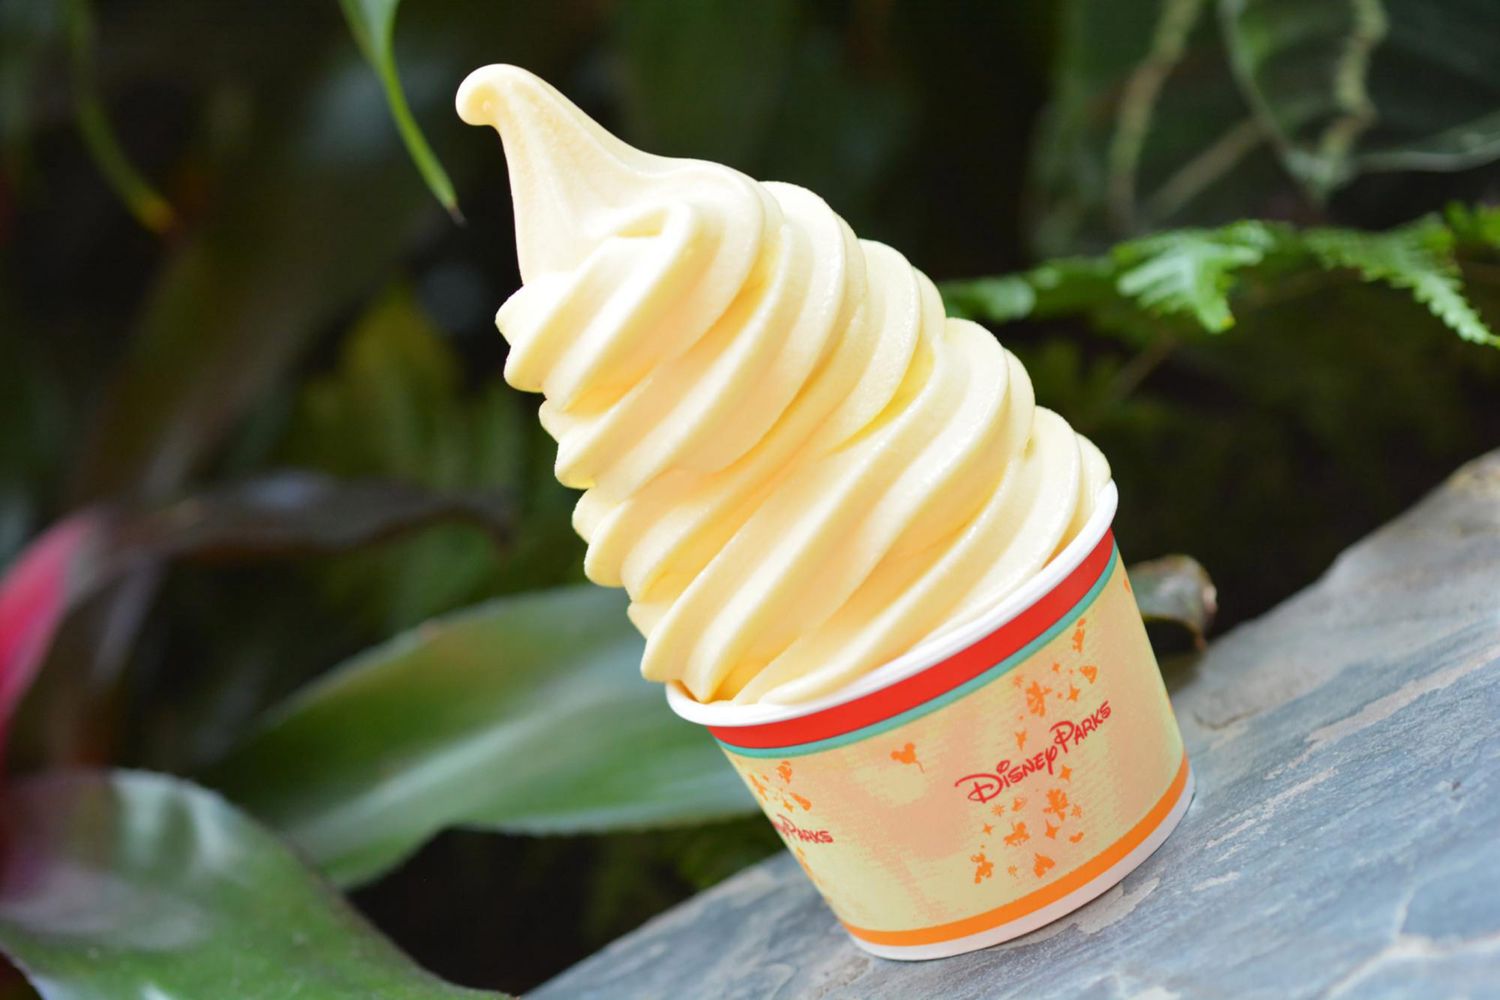 Disney Parks Shared Their Famous Dole Whip Recipe | PEOPLE.com